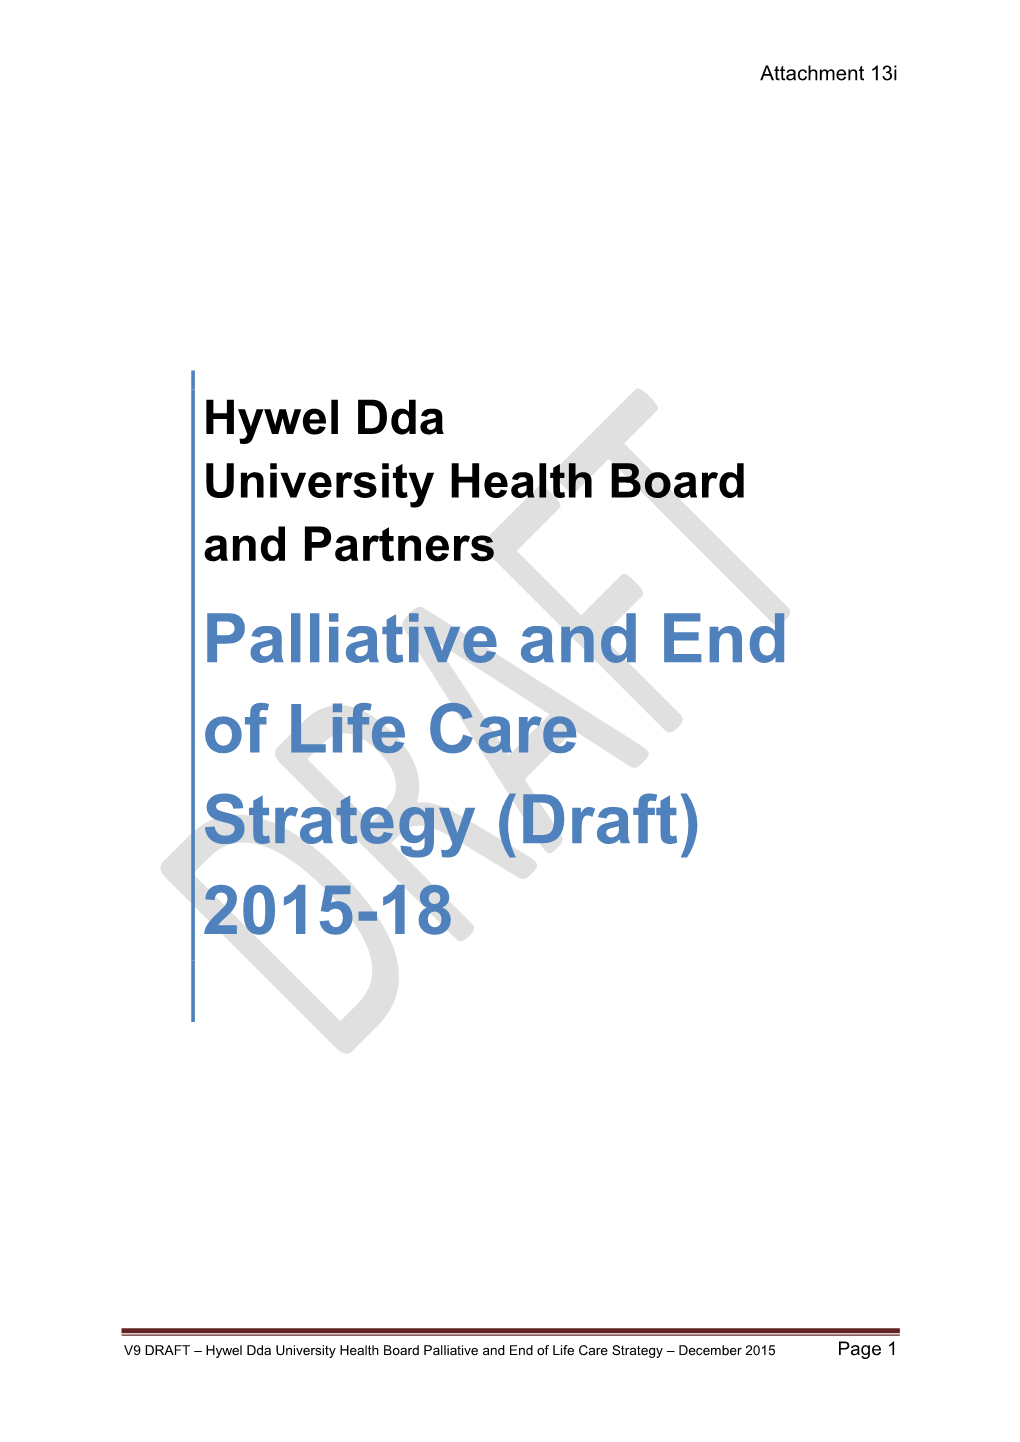 Palliative and End of Life Care Strategy (Draft) 2015-18